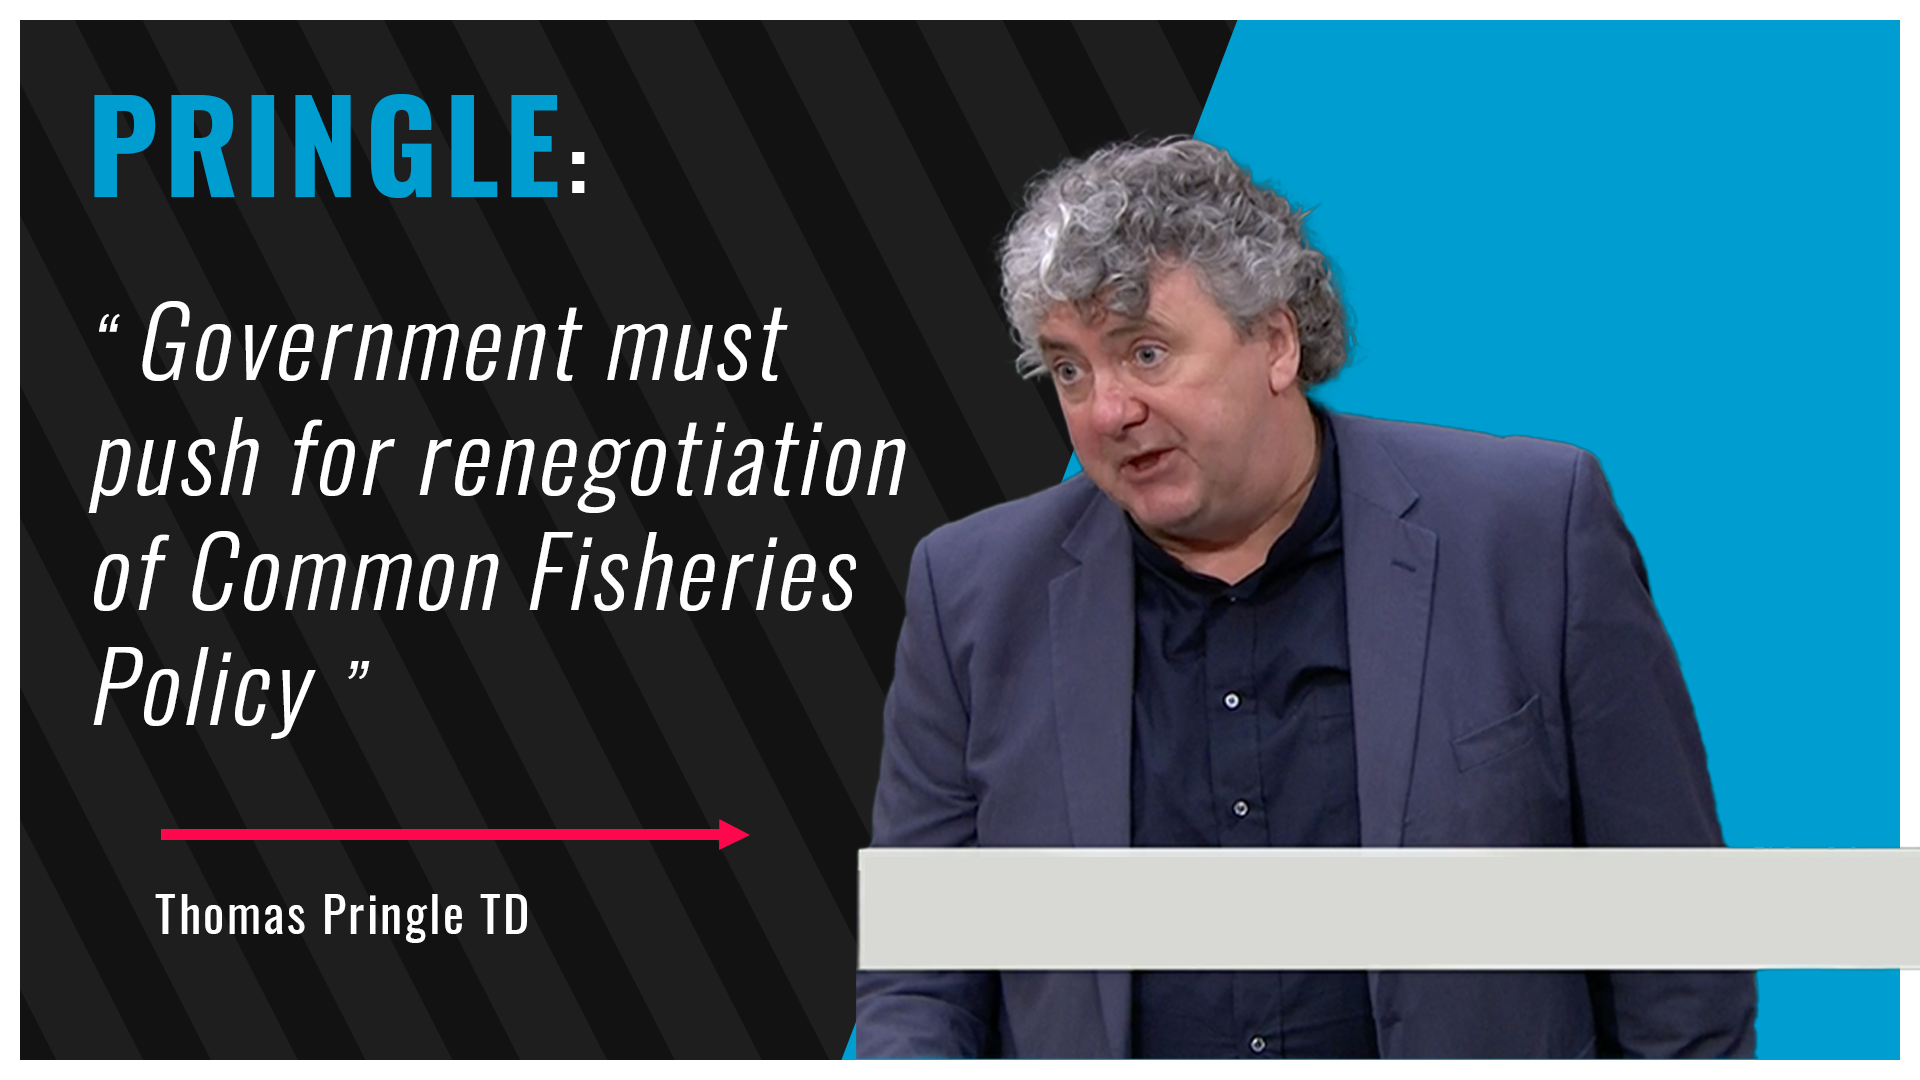 Thomas Pringle TD - Pringle says Government must push for renegotiation of Common Fisheries Policy